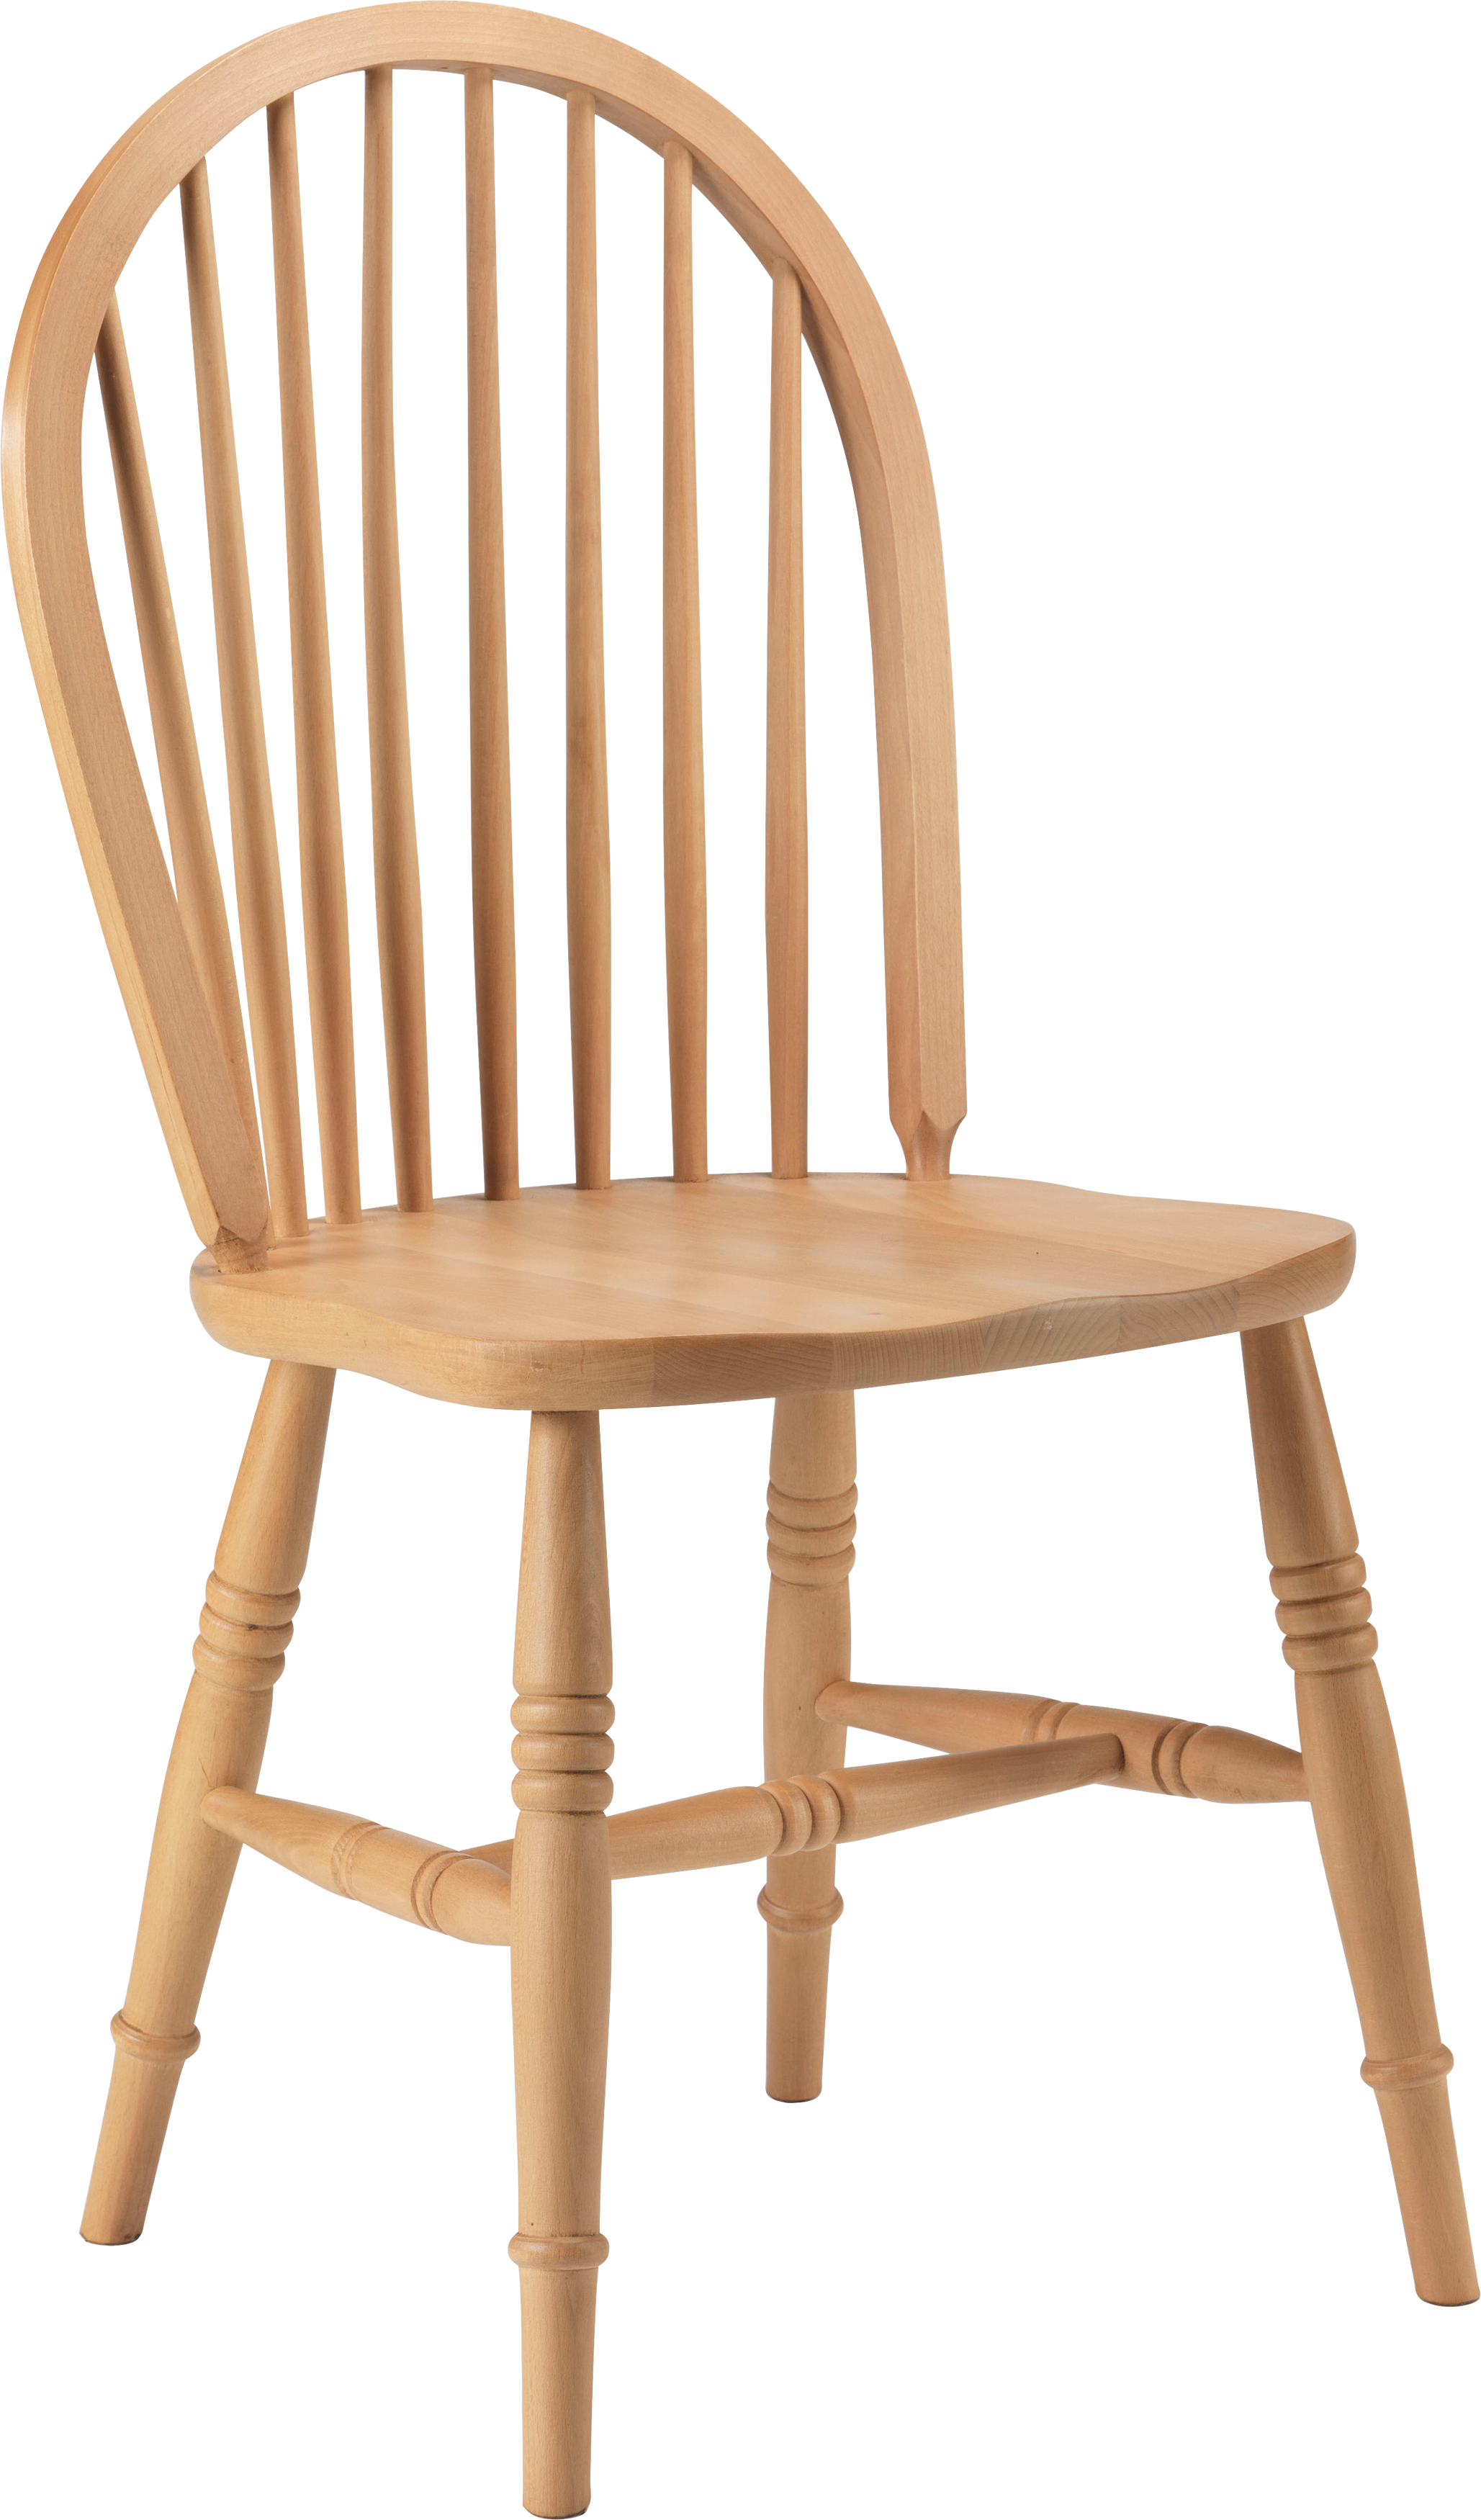 Chair Png Image Transparent Transparent Background Chair Png